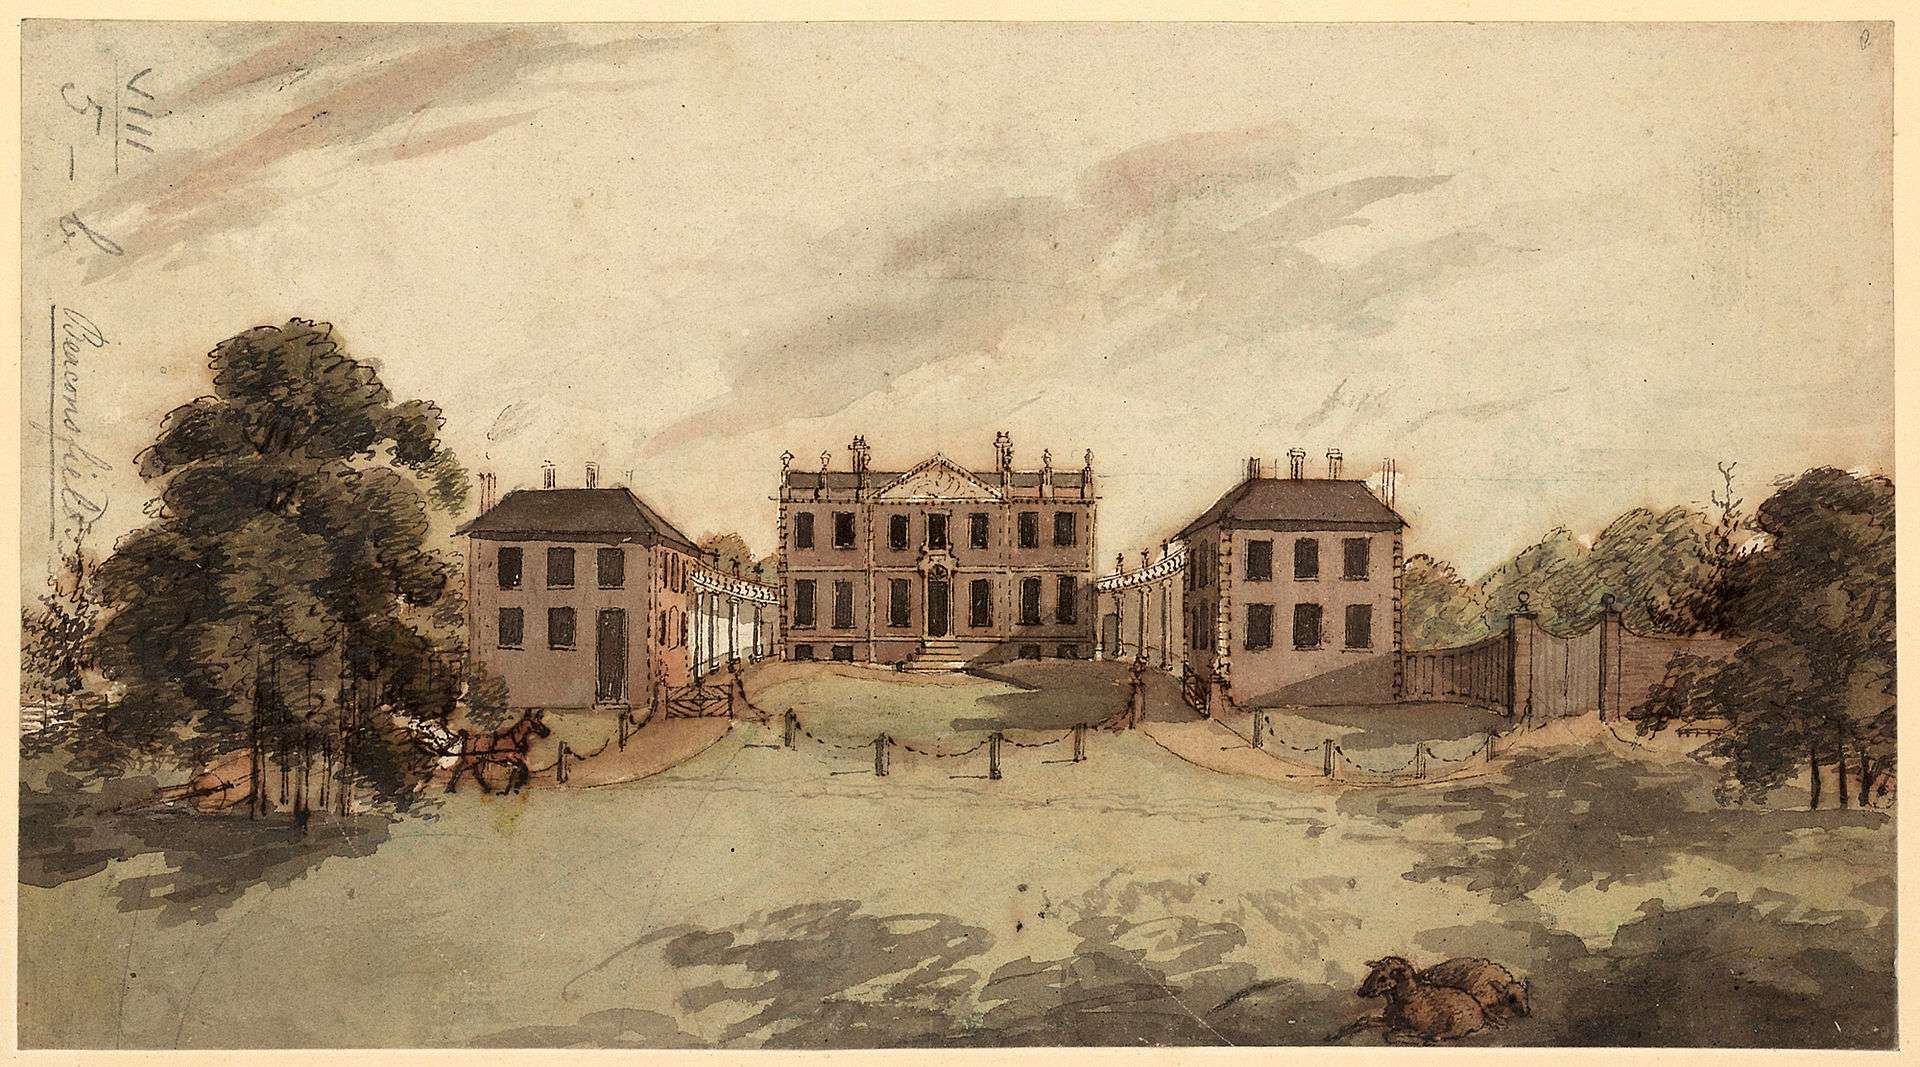 The Gregories estate purchased by Burke for £20,000 in 1768